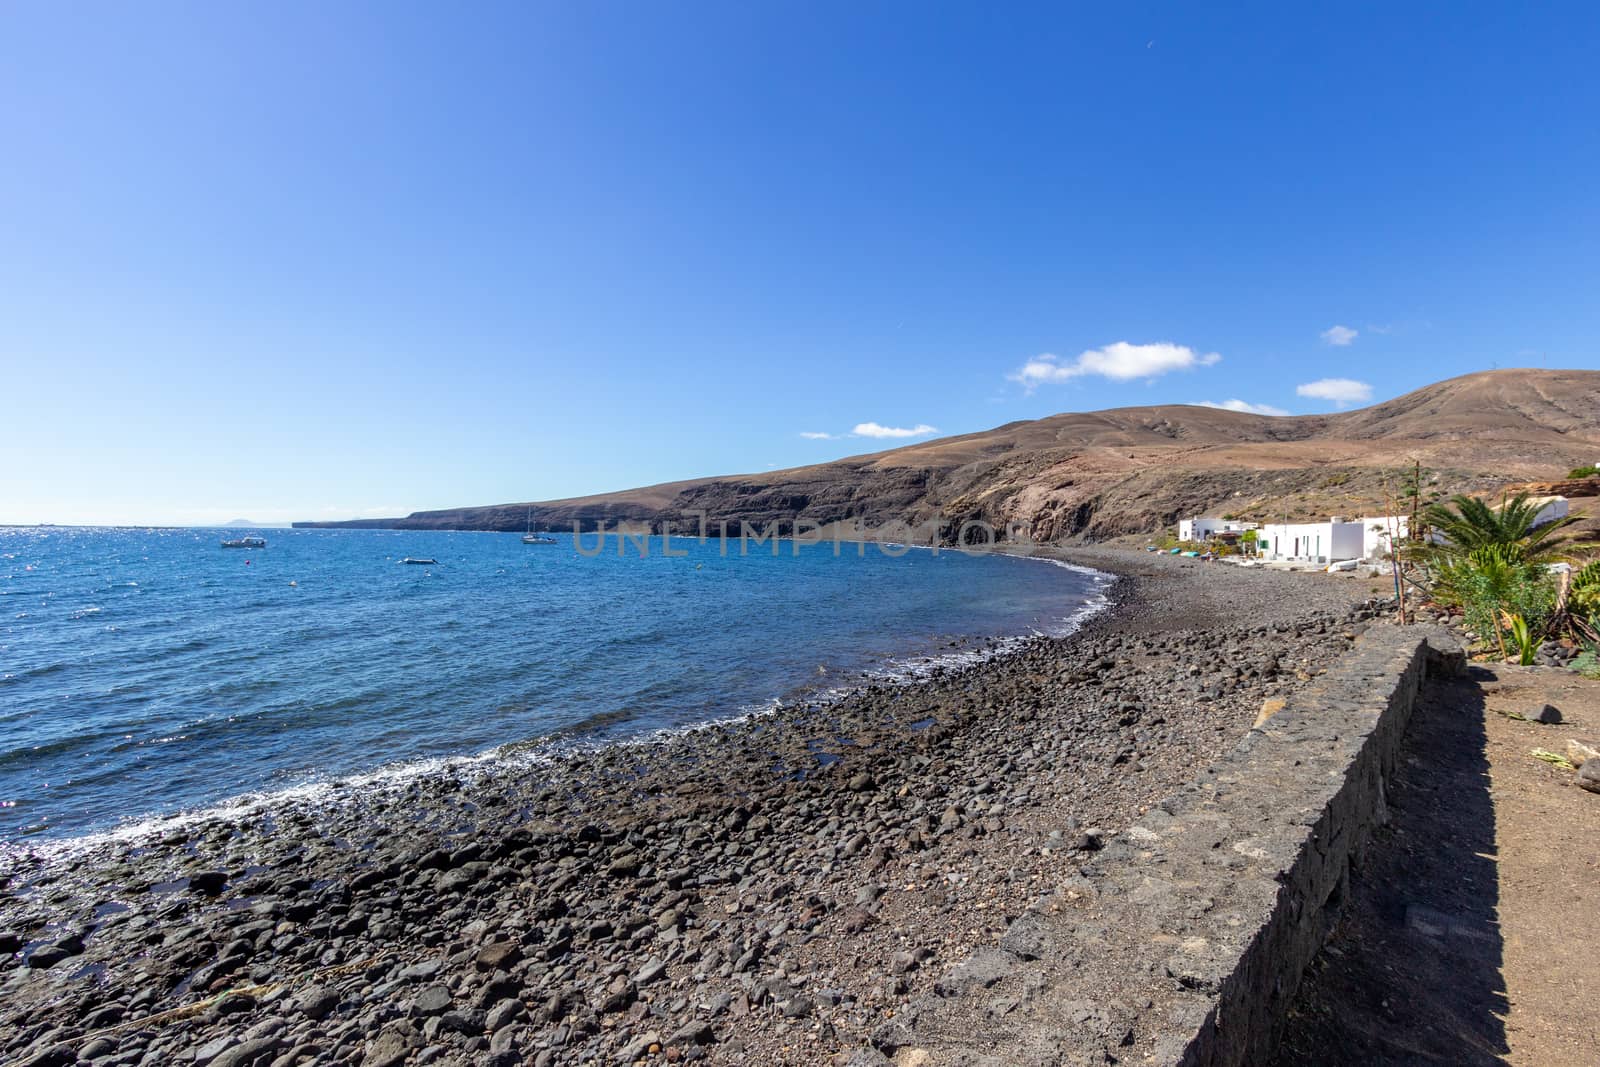 Rocky coast of Playa Quemada at Canary island Lanzarote with lava rocks, gravel beach and blue water. The sky is blue with white clouds.